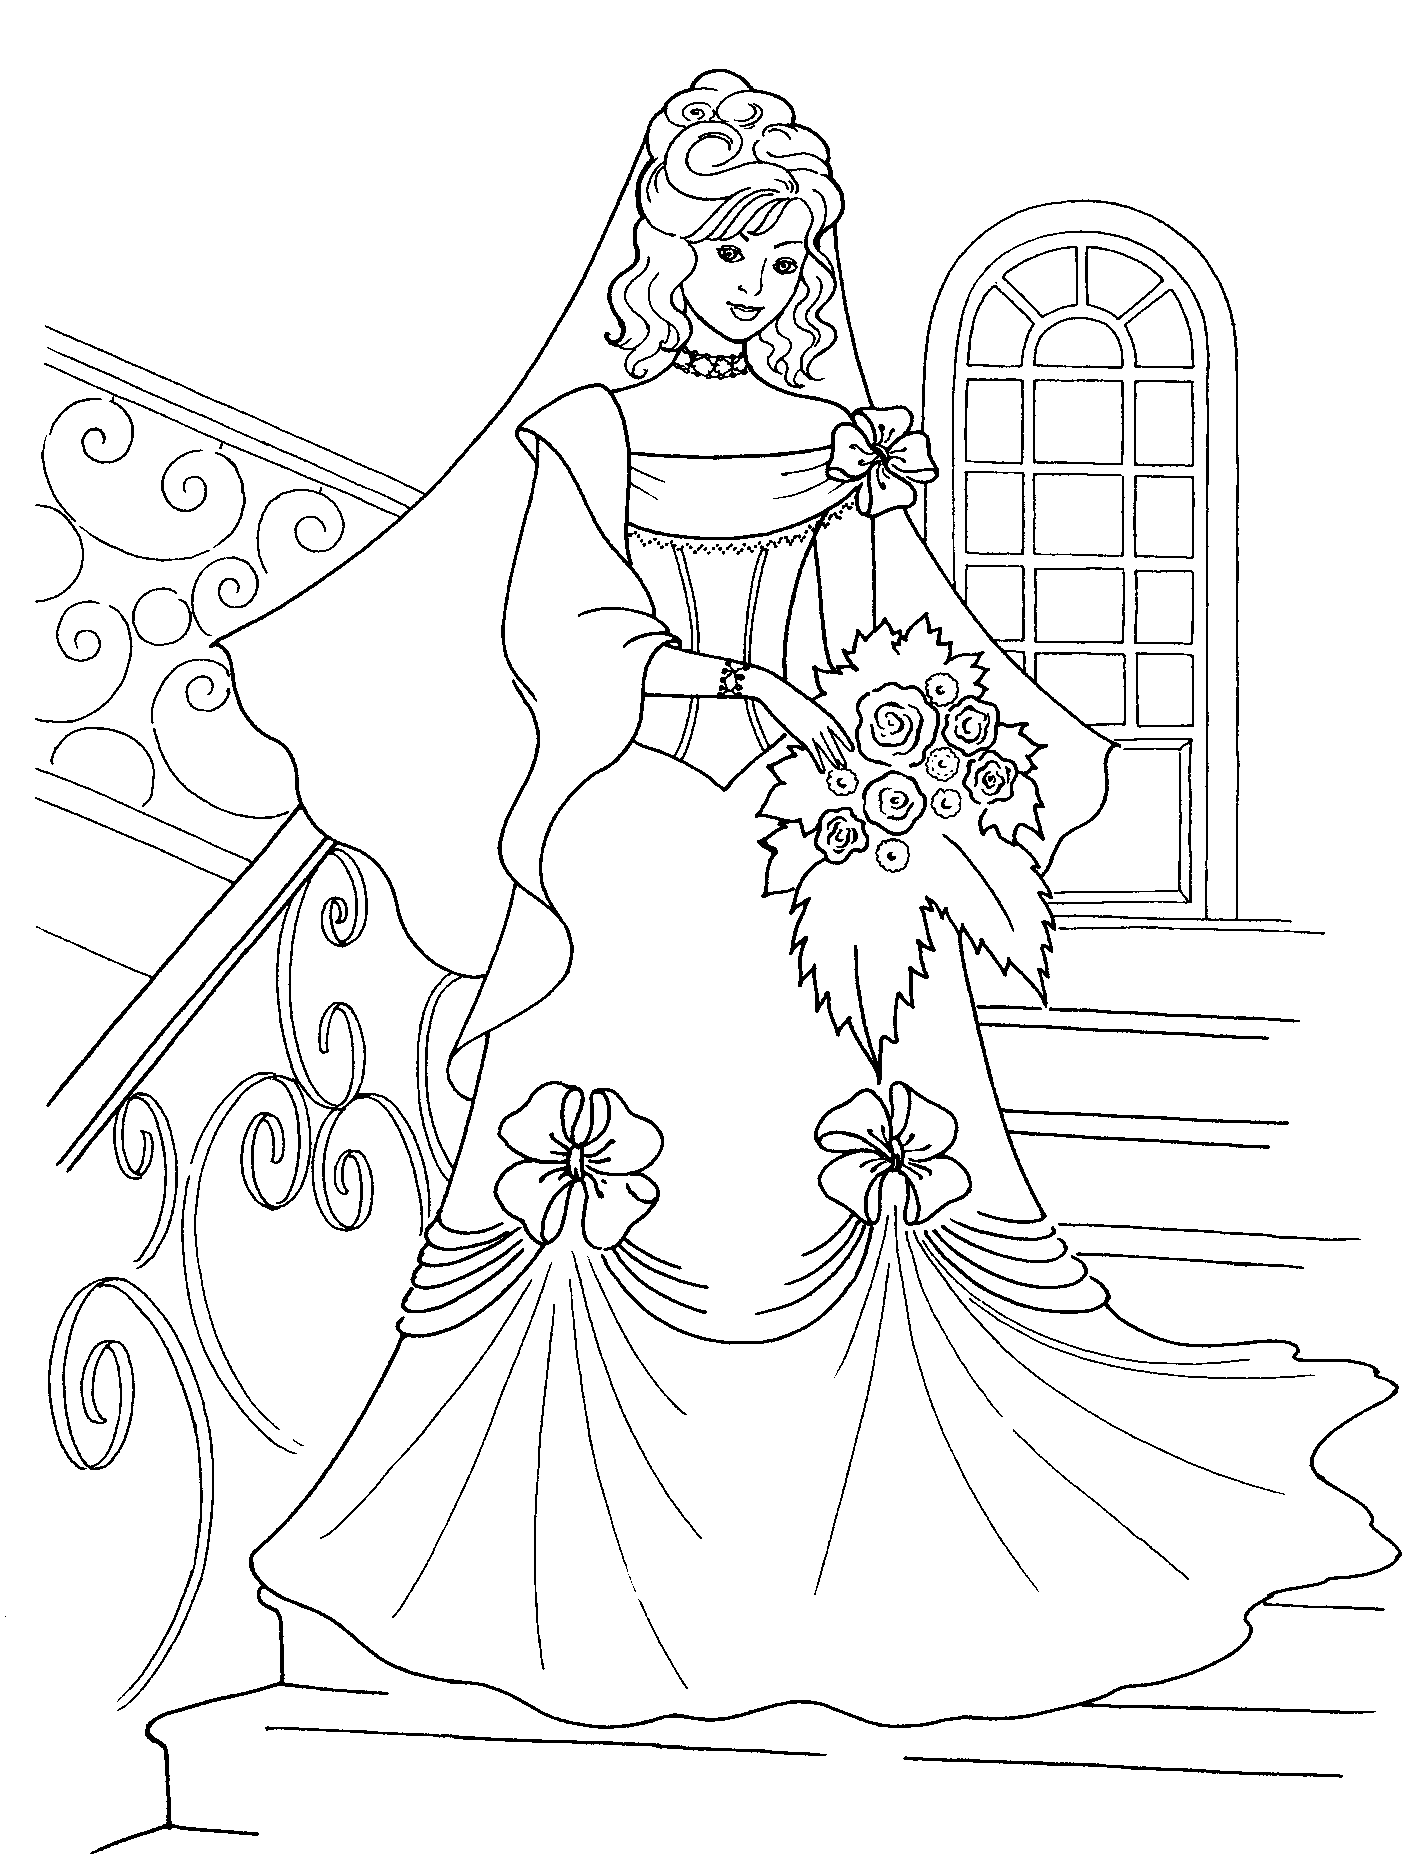 Princess And Her Wedding Dress Coloring Page